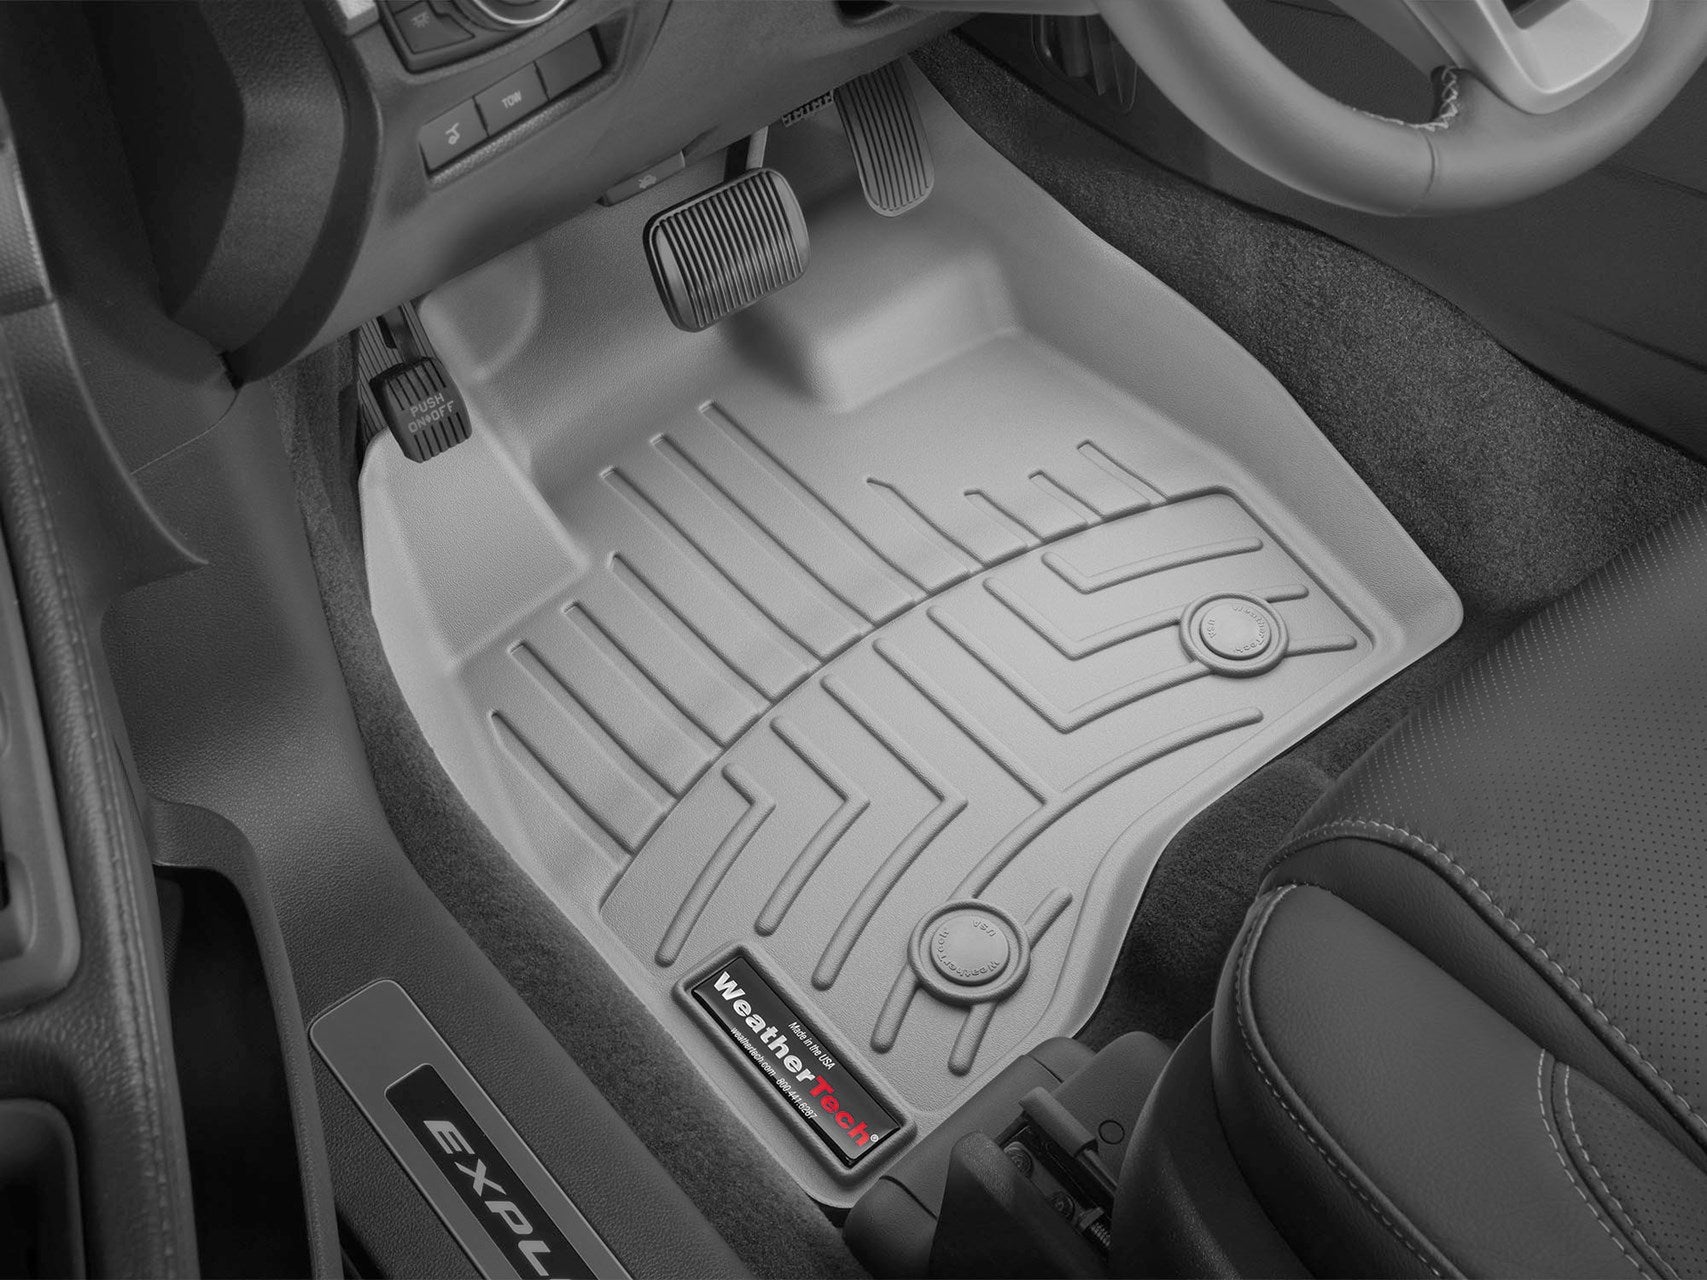 FloorLiner - Unmatched Protection for Your Vehicle's Floors